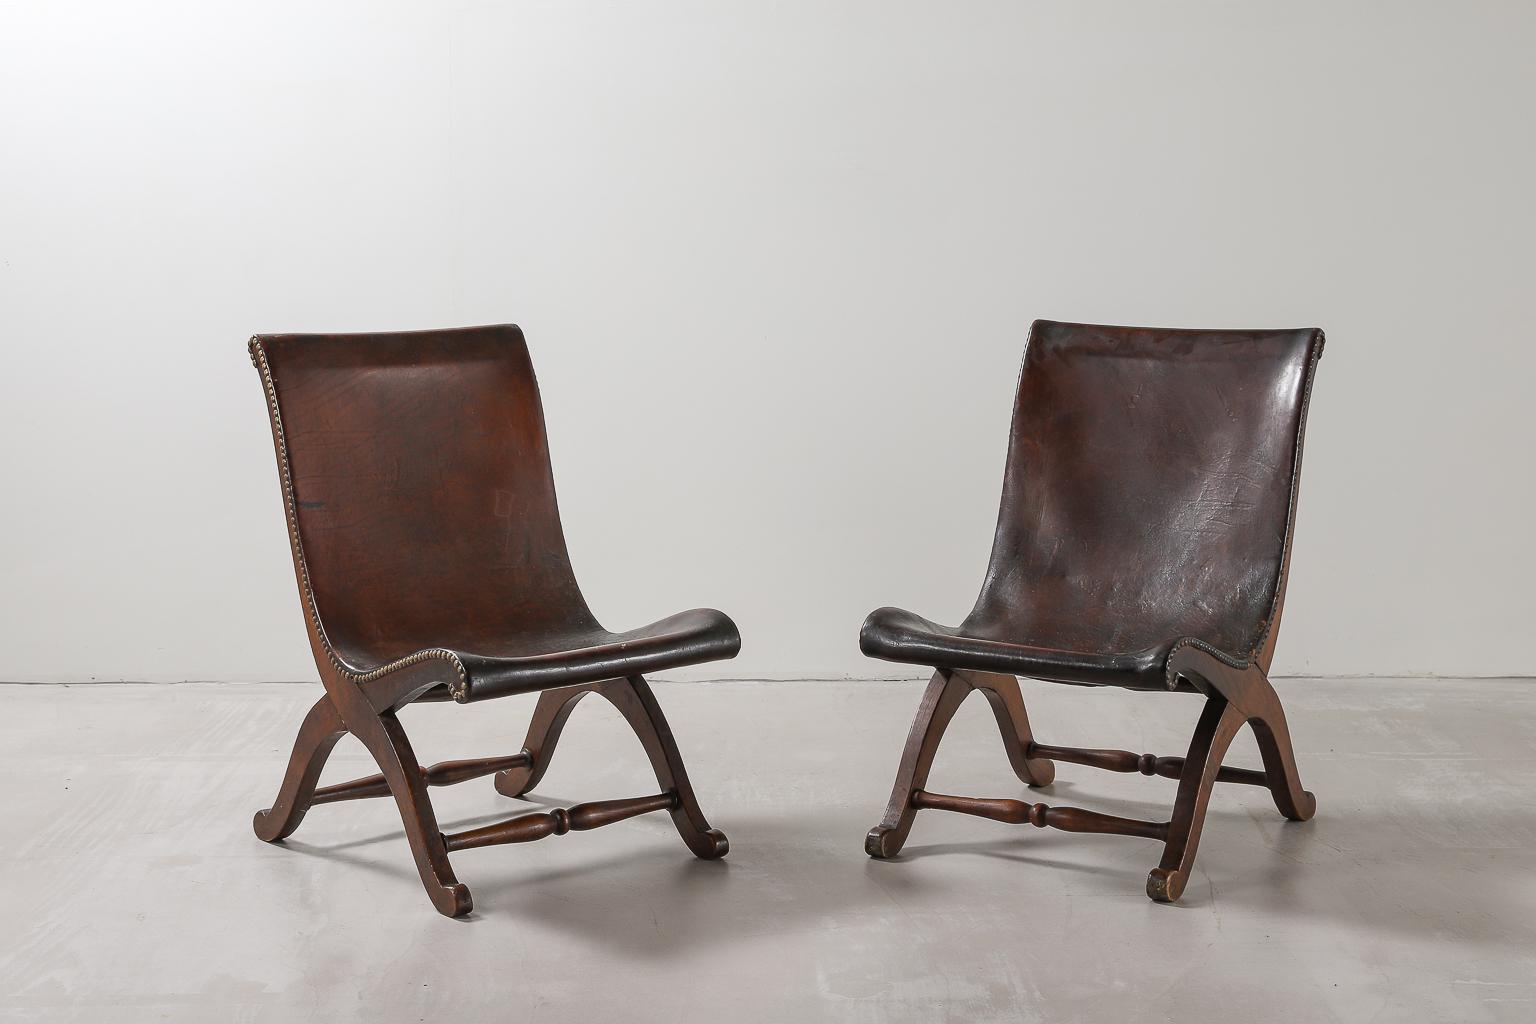 Pair of Spanish Leather Armchairs by Pierre Lottier for Valenti, 1940s In Good Condition In London, Charterhouse Square